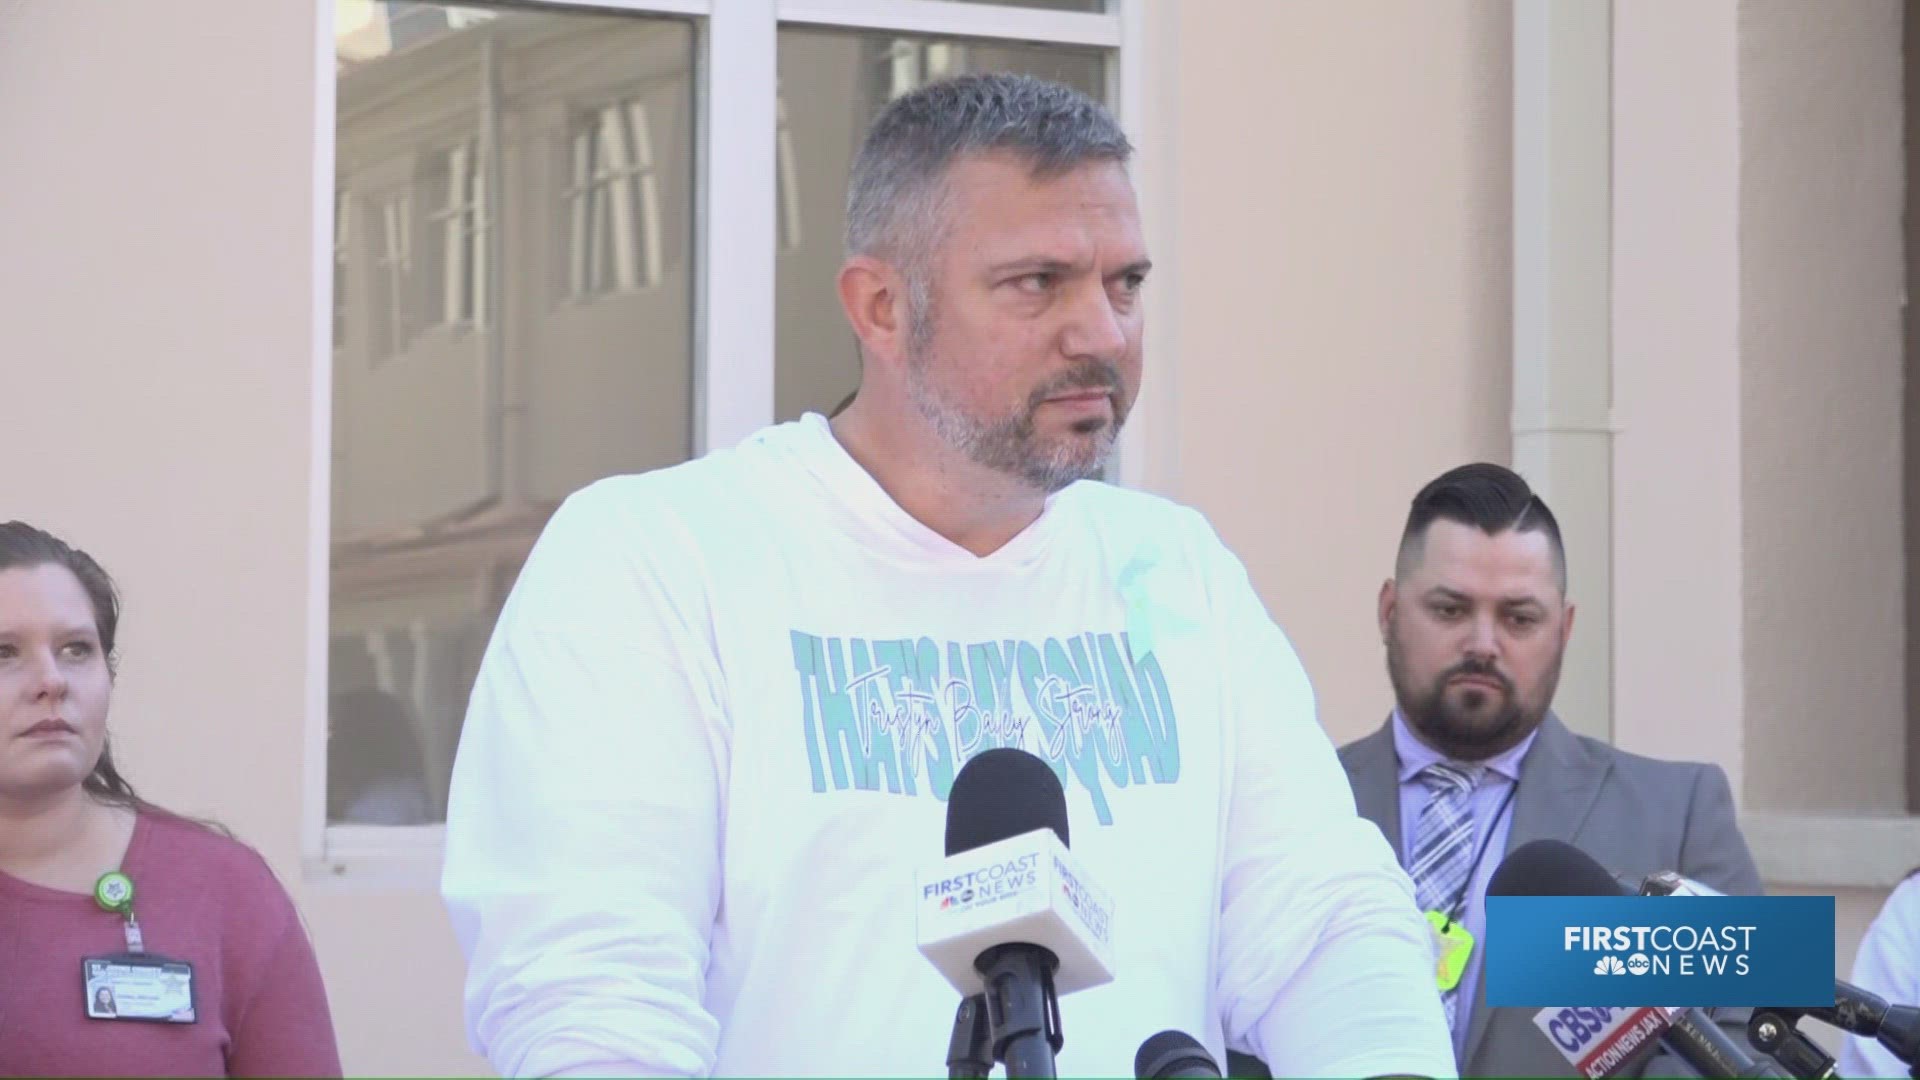 Forrest Bailey spoke for the Bailey 7 addressing the community, media, law enforcement and all involved in the case. He also spoke directly to his daughter.